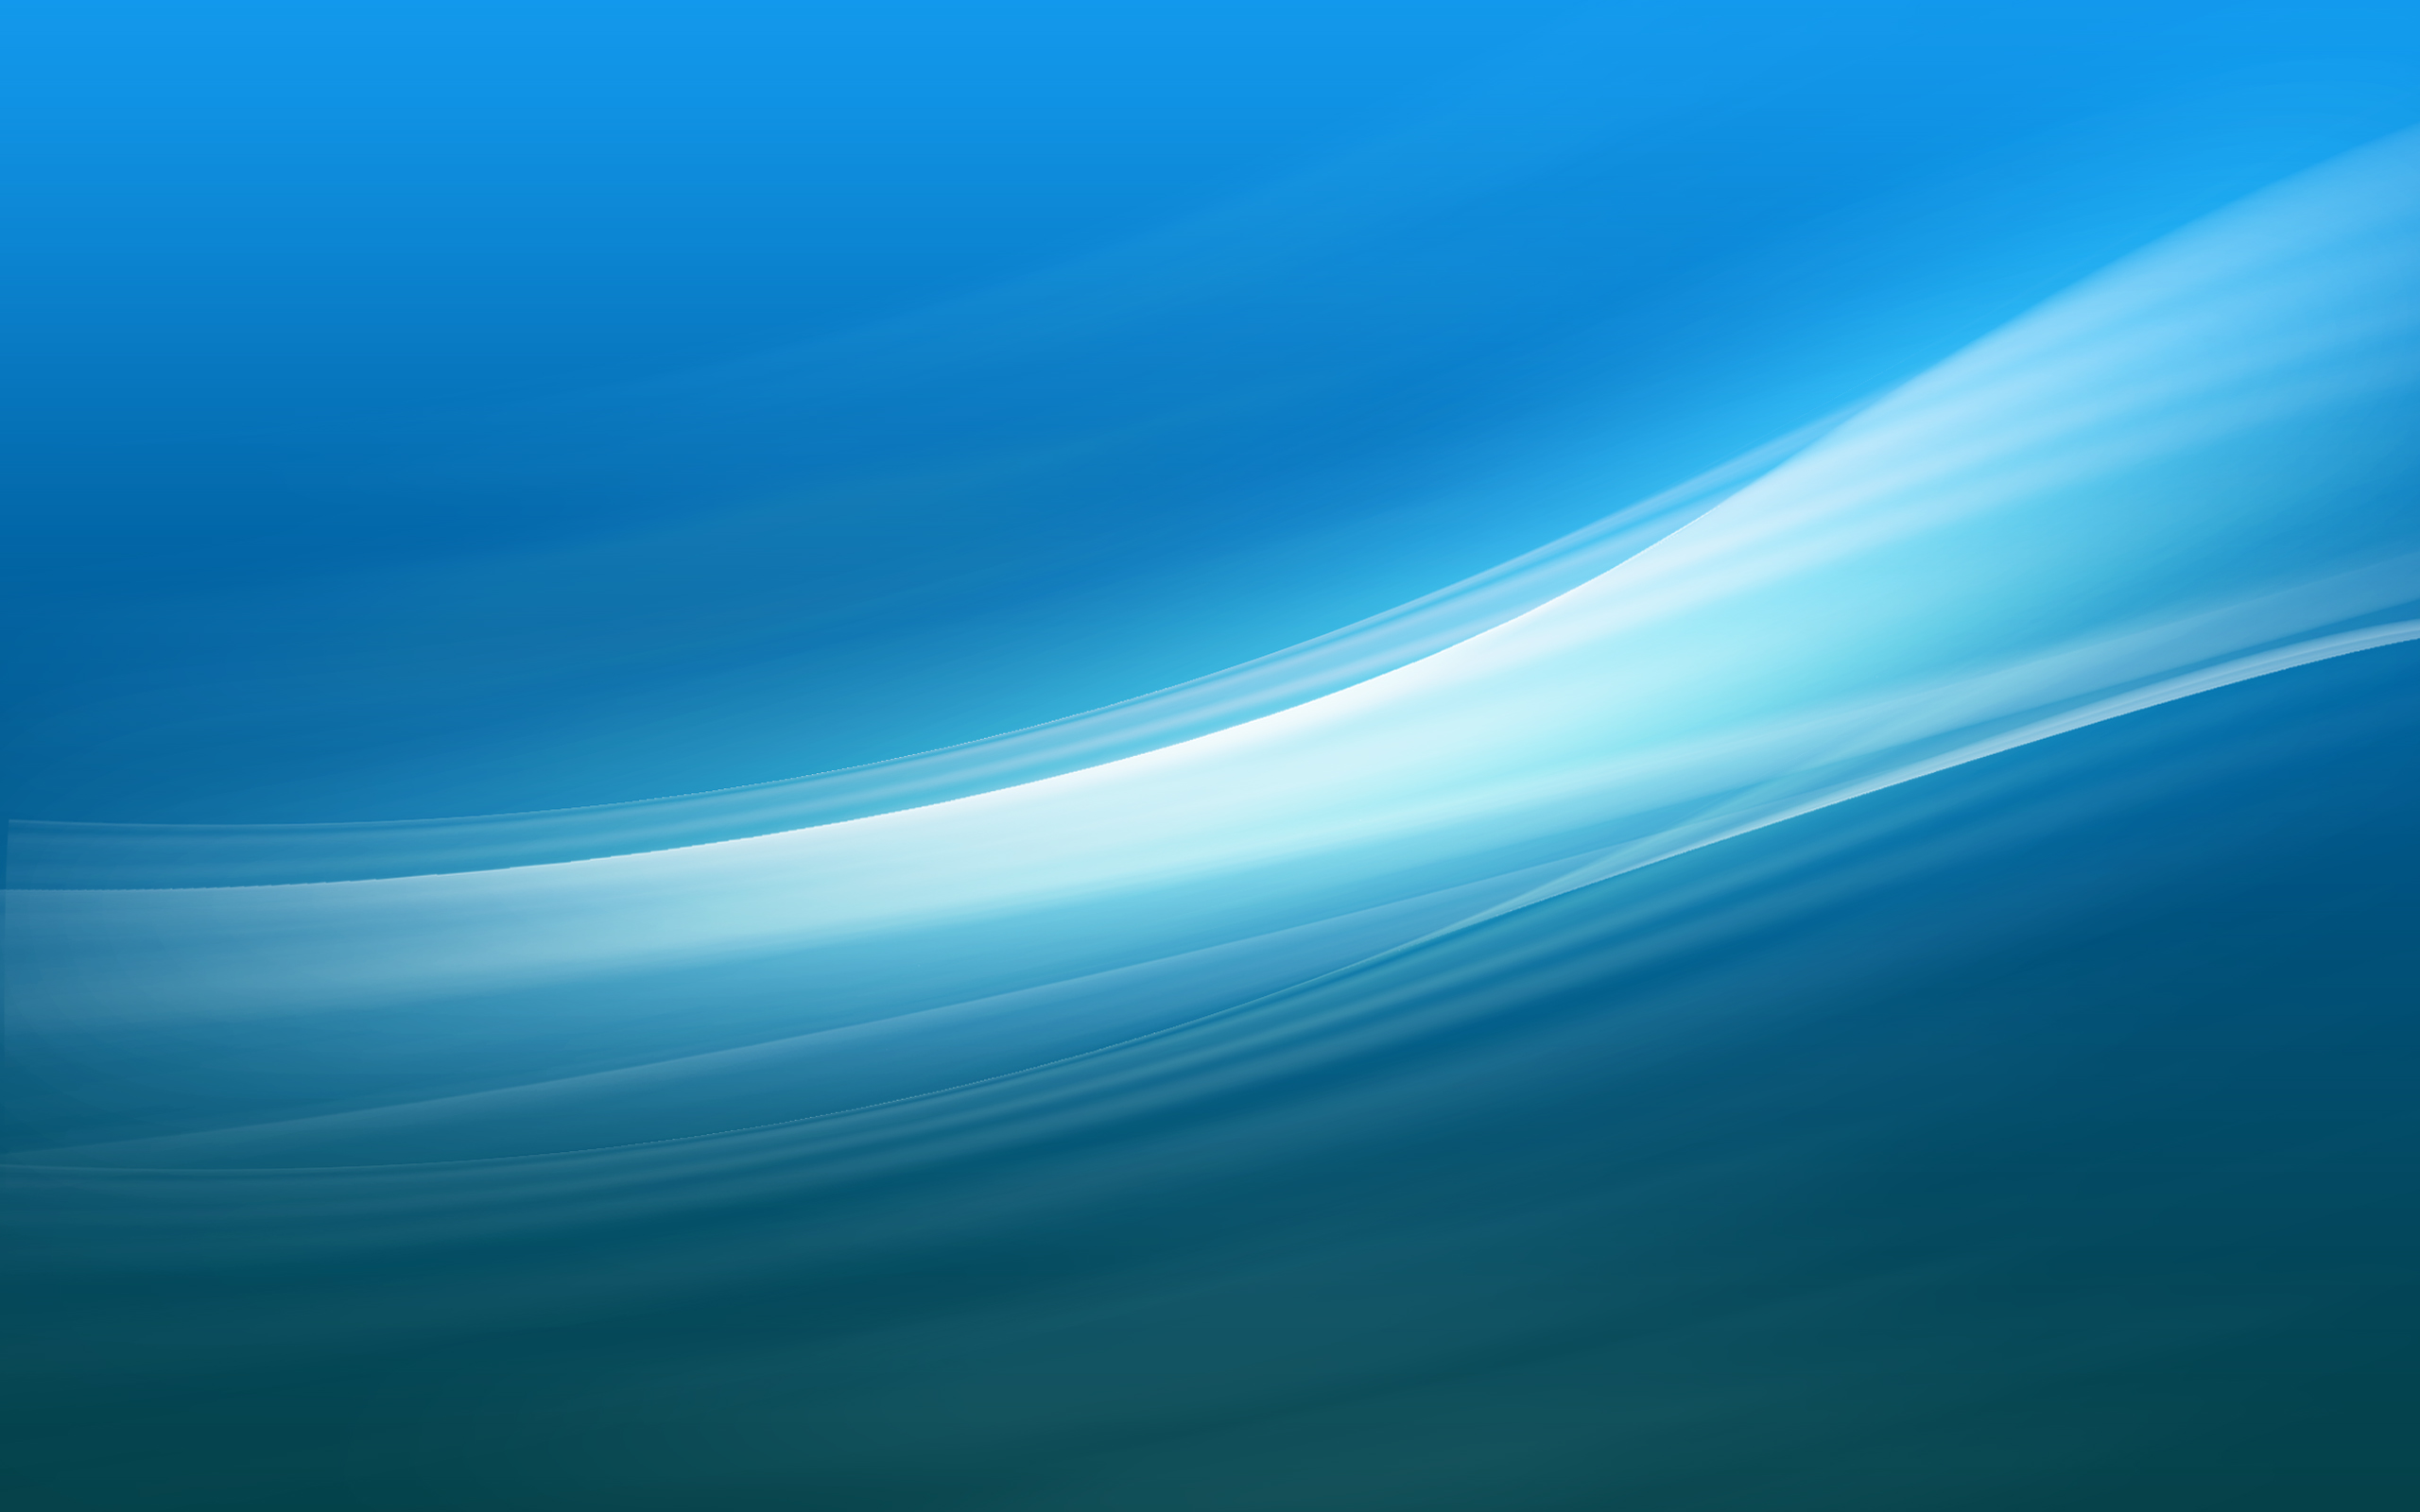 Light Blue Desktop Wallpaper Pc Android iPhone And iPad